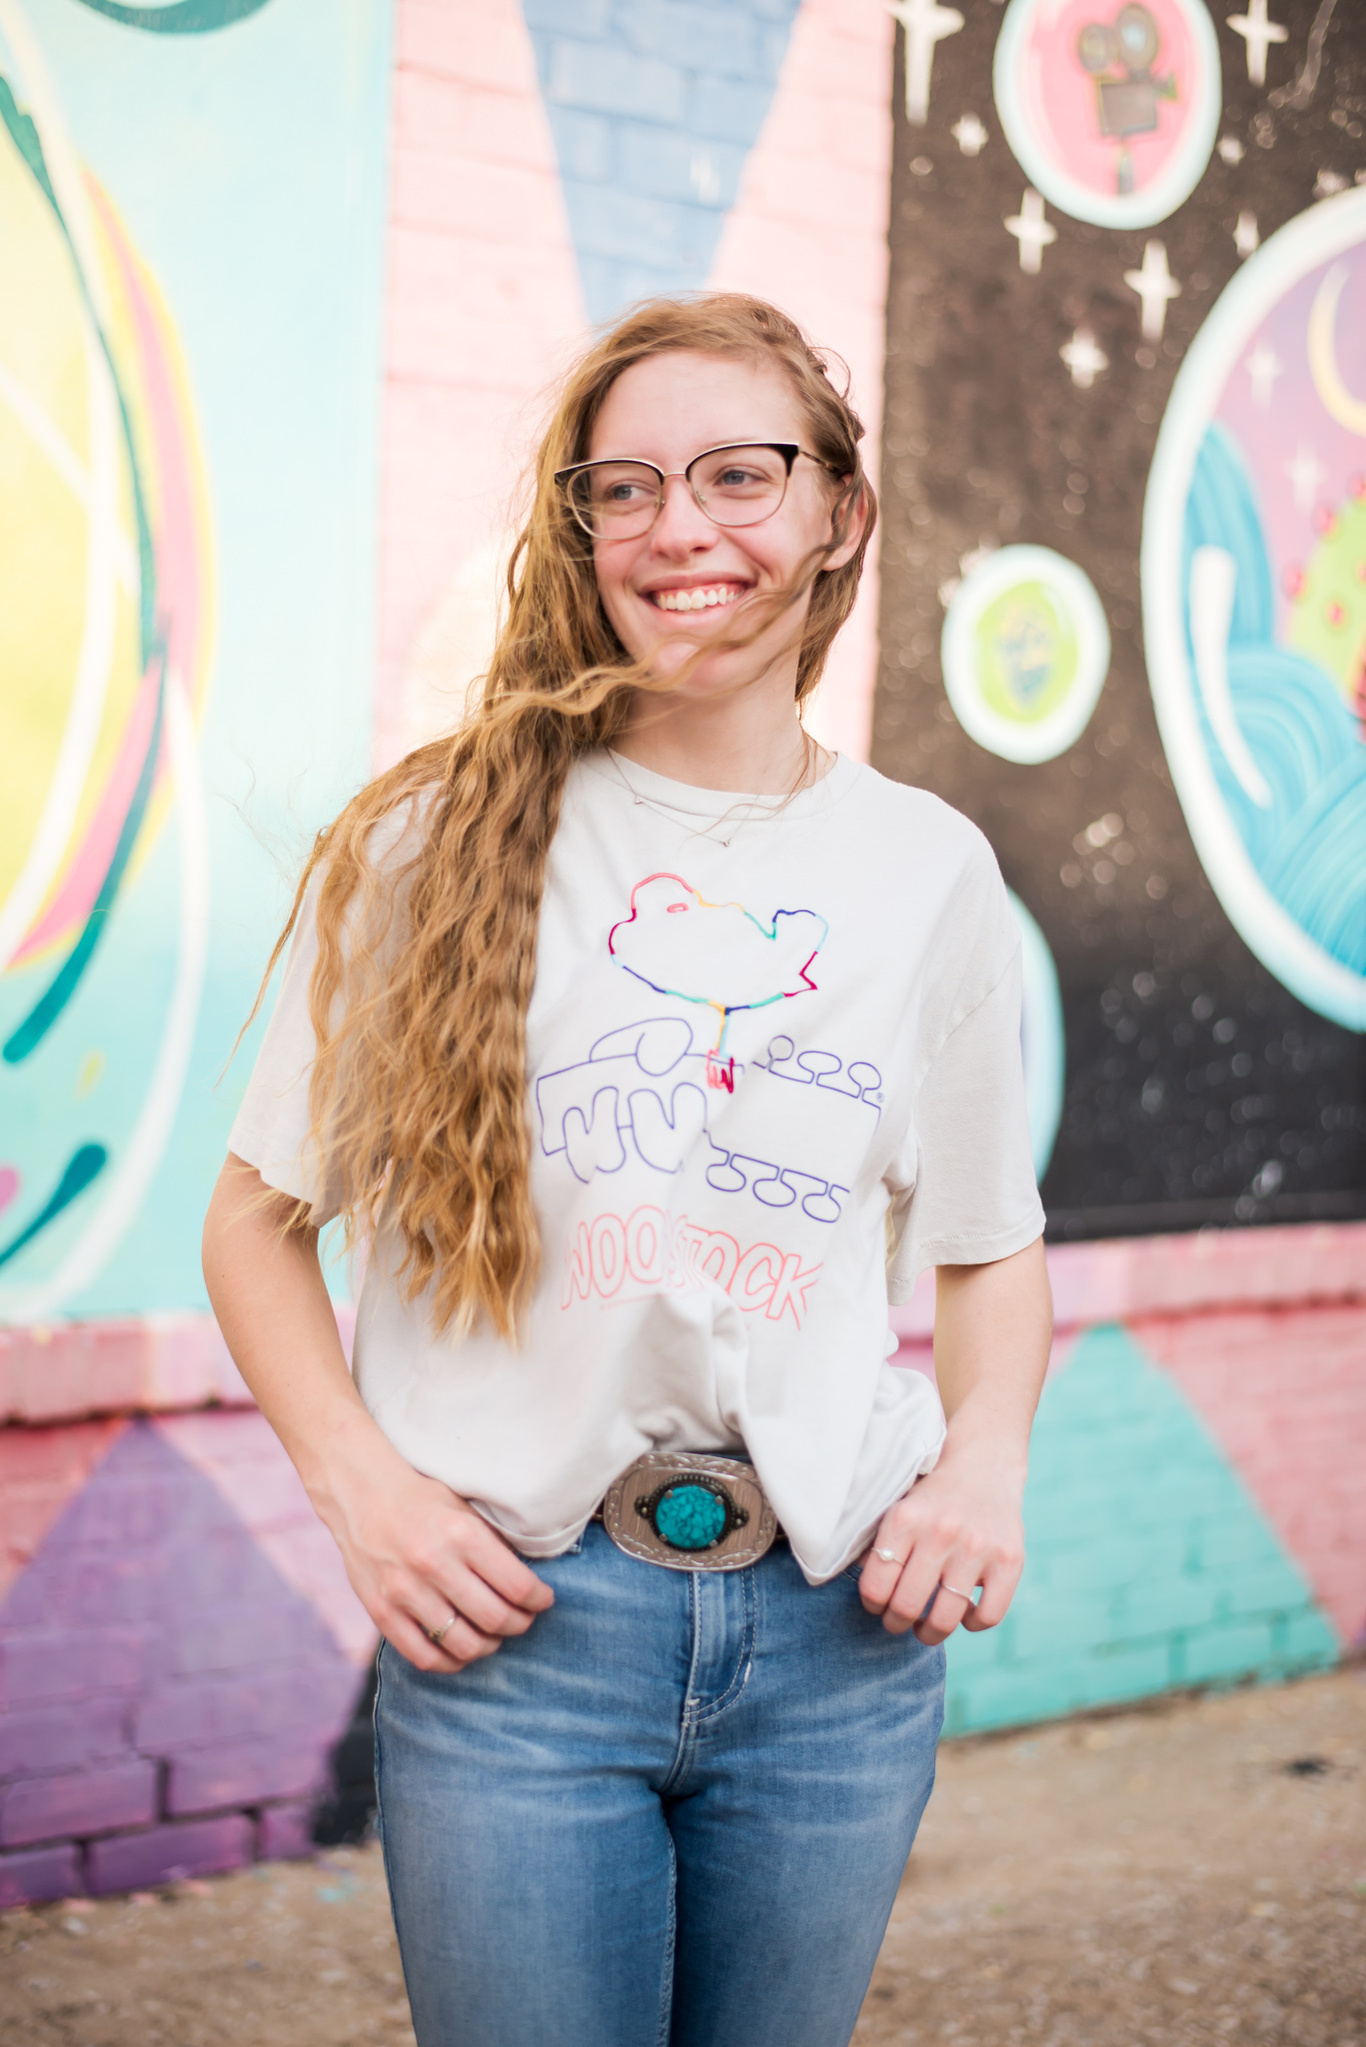 senior girl with long wavy blond hair wearing a graphic tee, blue jeans and turquoise belt buckle stands and smiles in front of a colorful wall mural in OKC